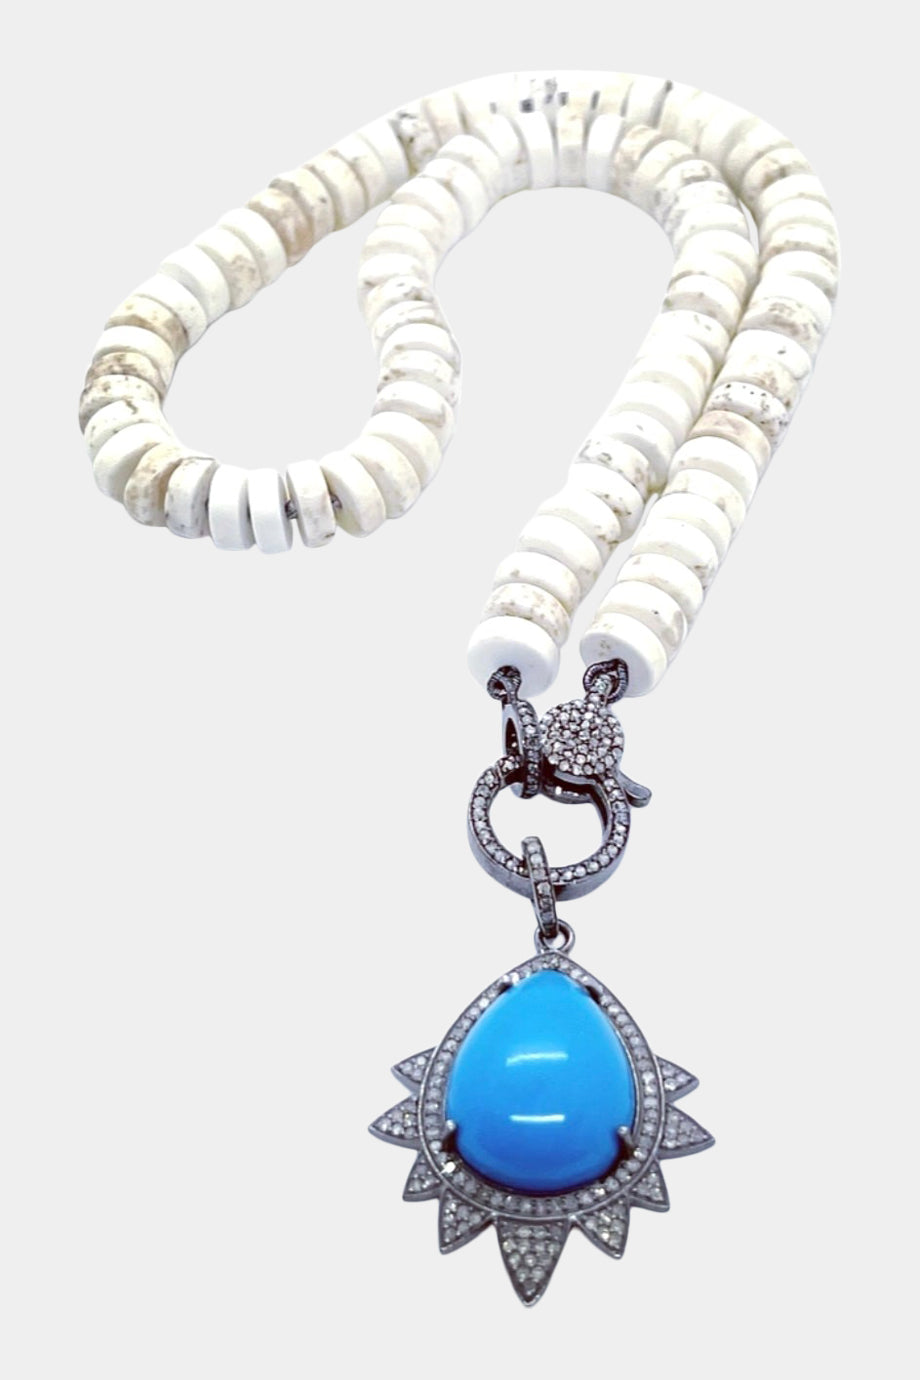 White Magnesite Knotted Necklace Turquoise Diamond Pendant